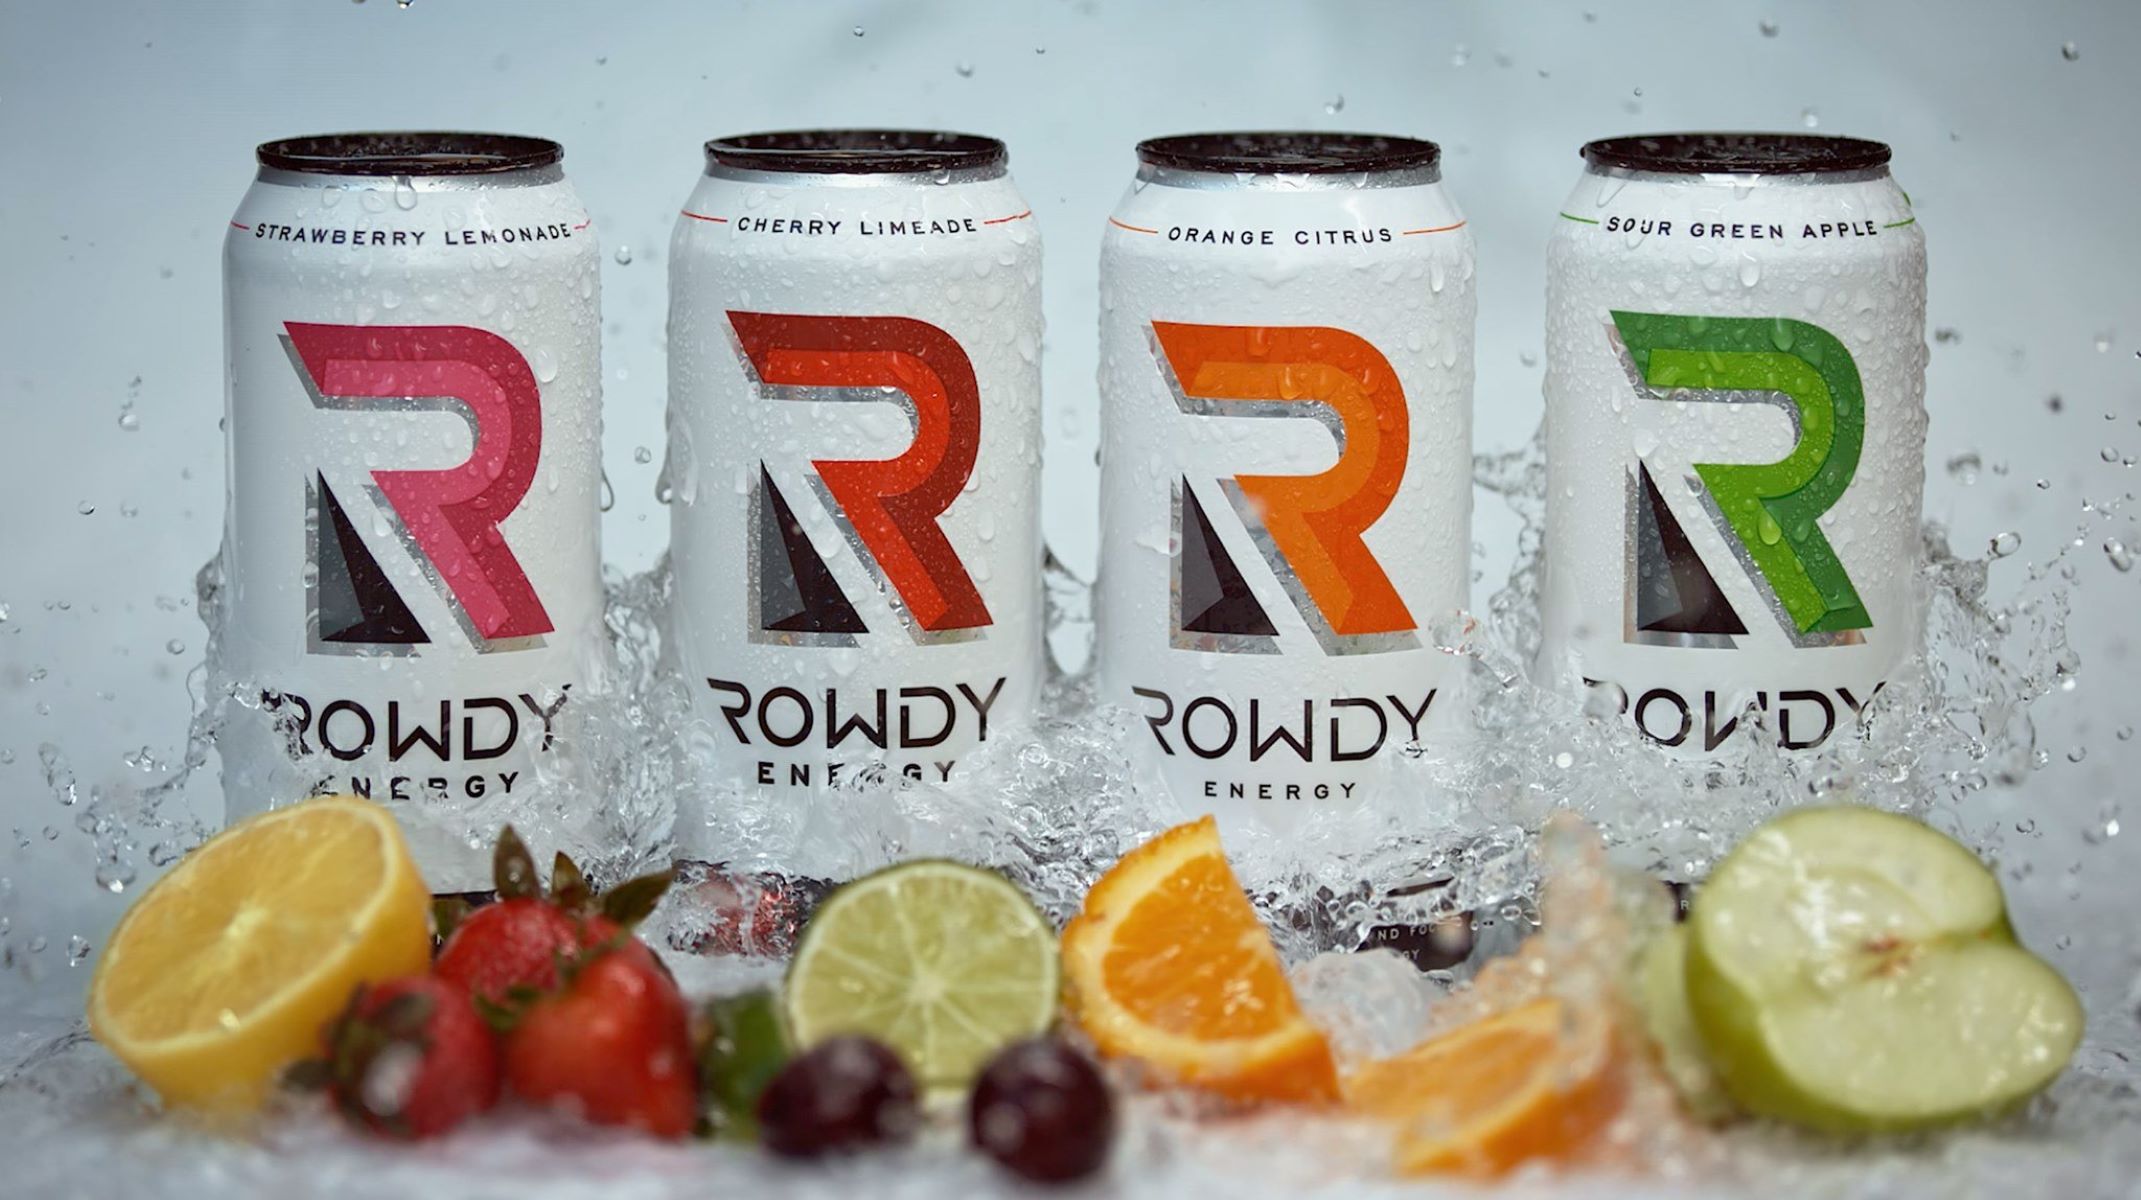 10-rowdy-energy-nutrition-facts